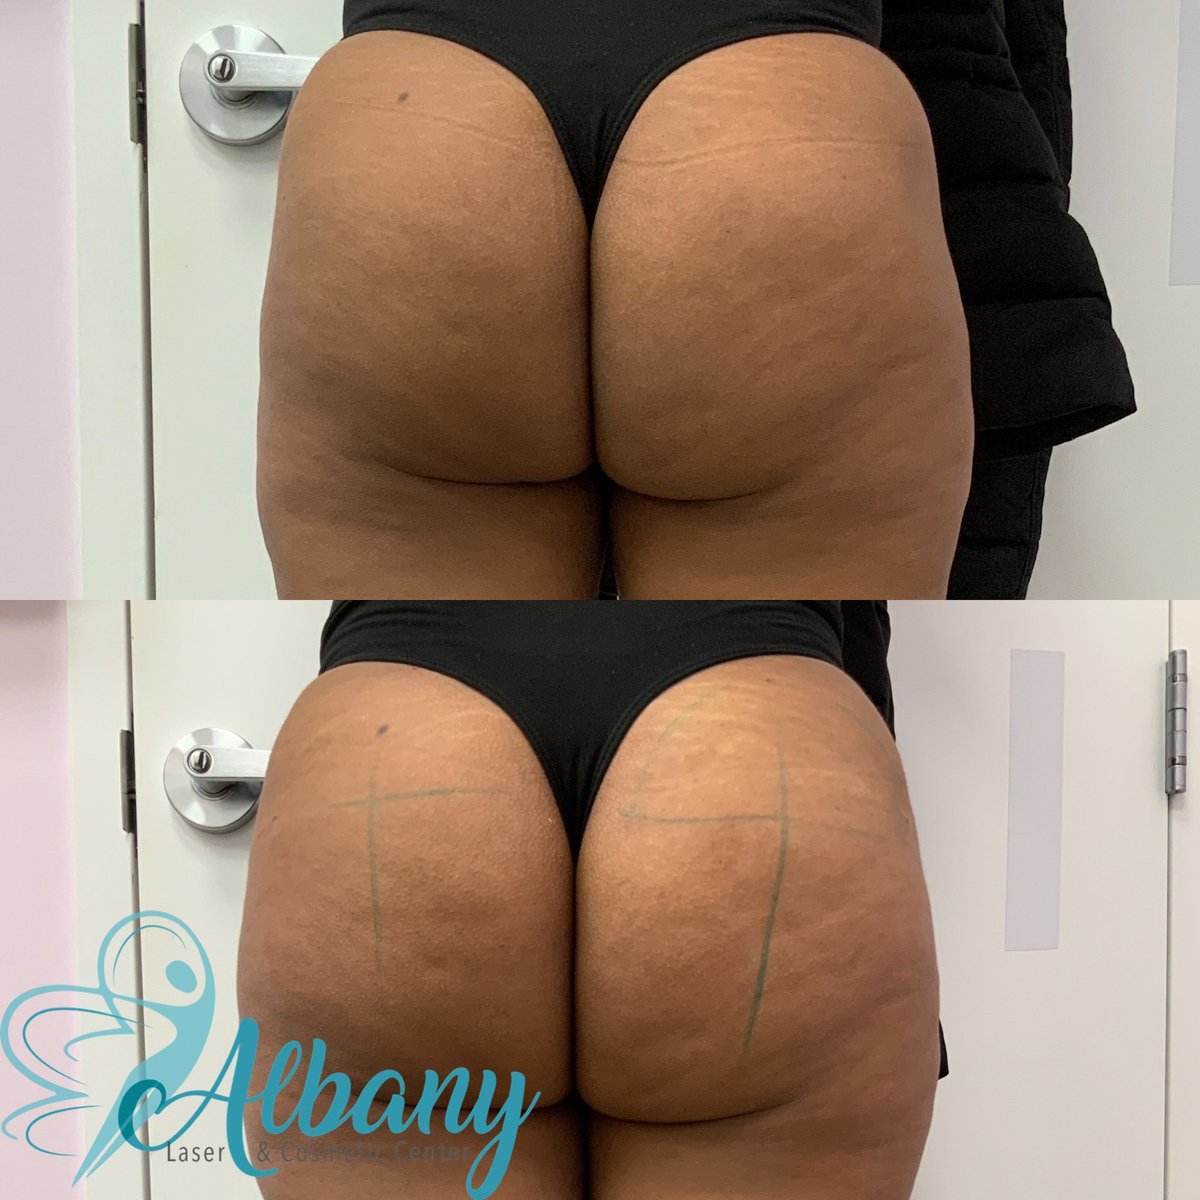 Feeling bootylicious and confident like never before! 🍑 Thanks to the magic of non-surgical Brazilian Butt Lift, the patient now have the curves she always dreamed of. #bootygoals #nonsurgicalbbl #selflove #confidenceboost
albanylaser.ca/services/brazi…